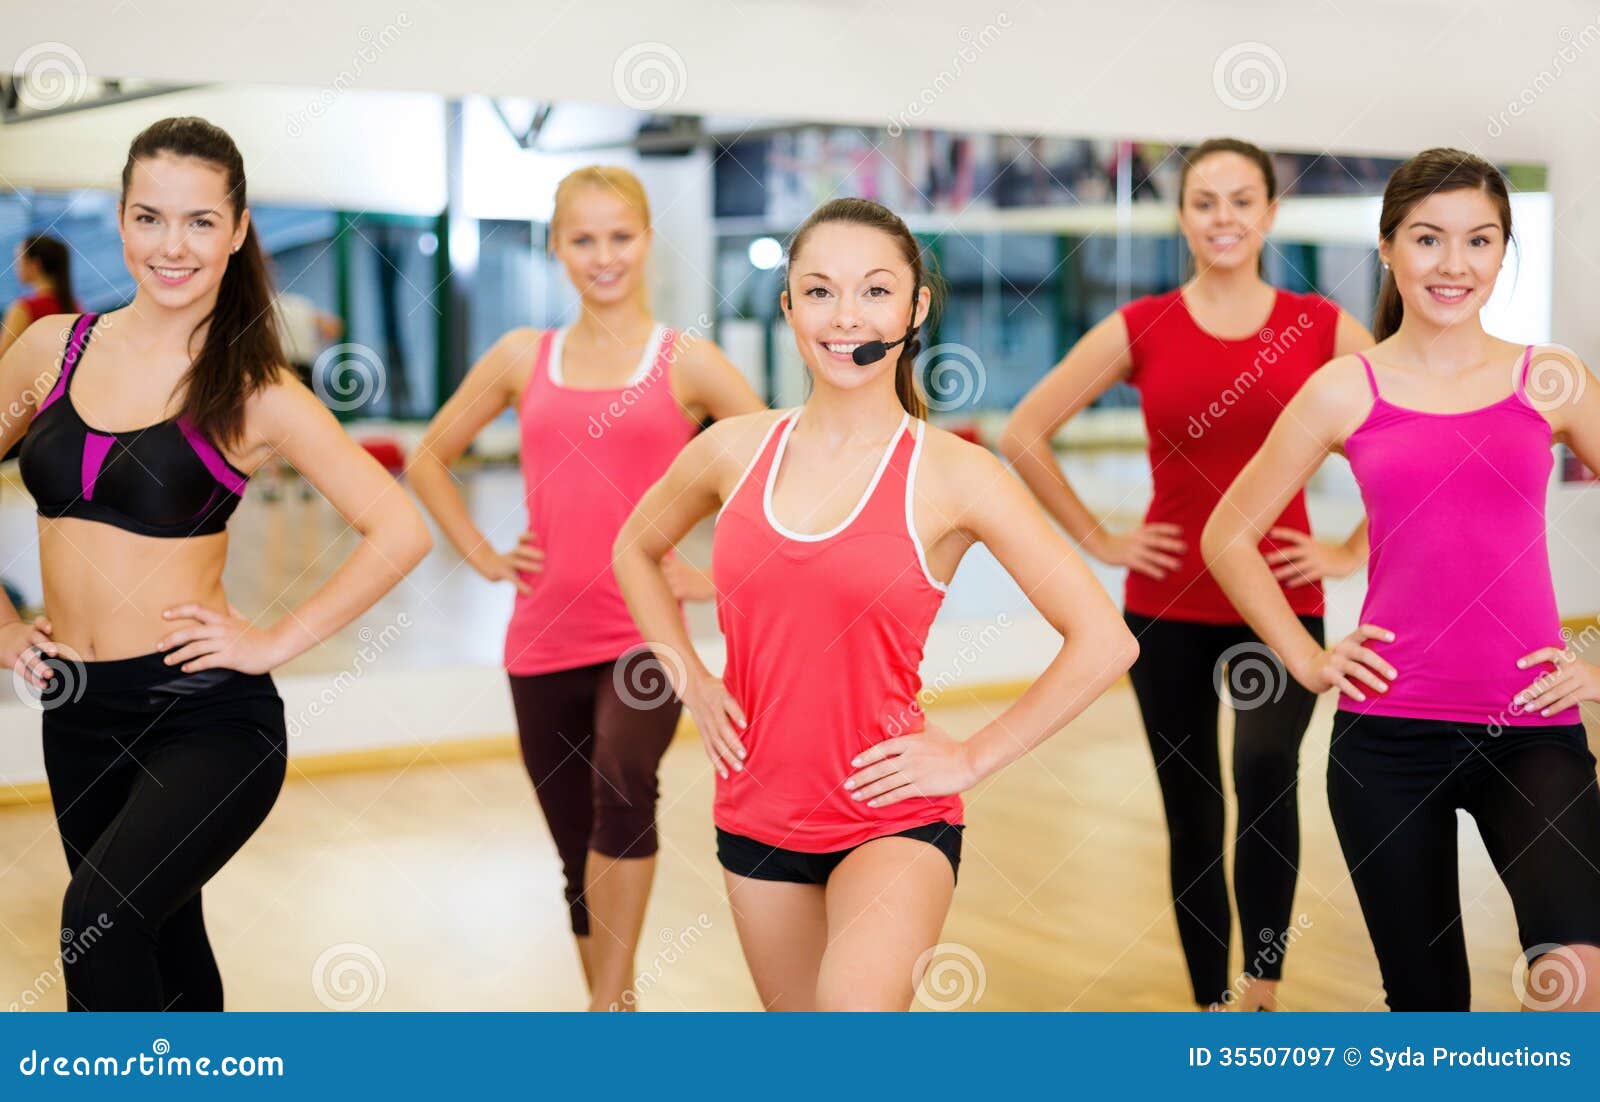 Happy Group Of Fitness People In A Gym Stock Photo, Picture and Royalty  Free Image. Image 42291236.